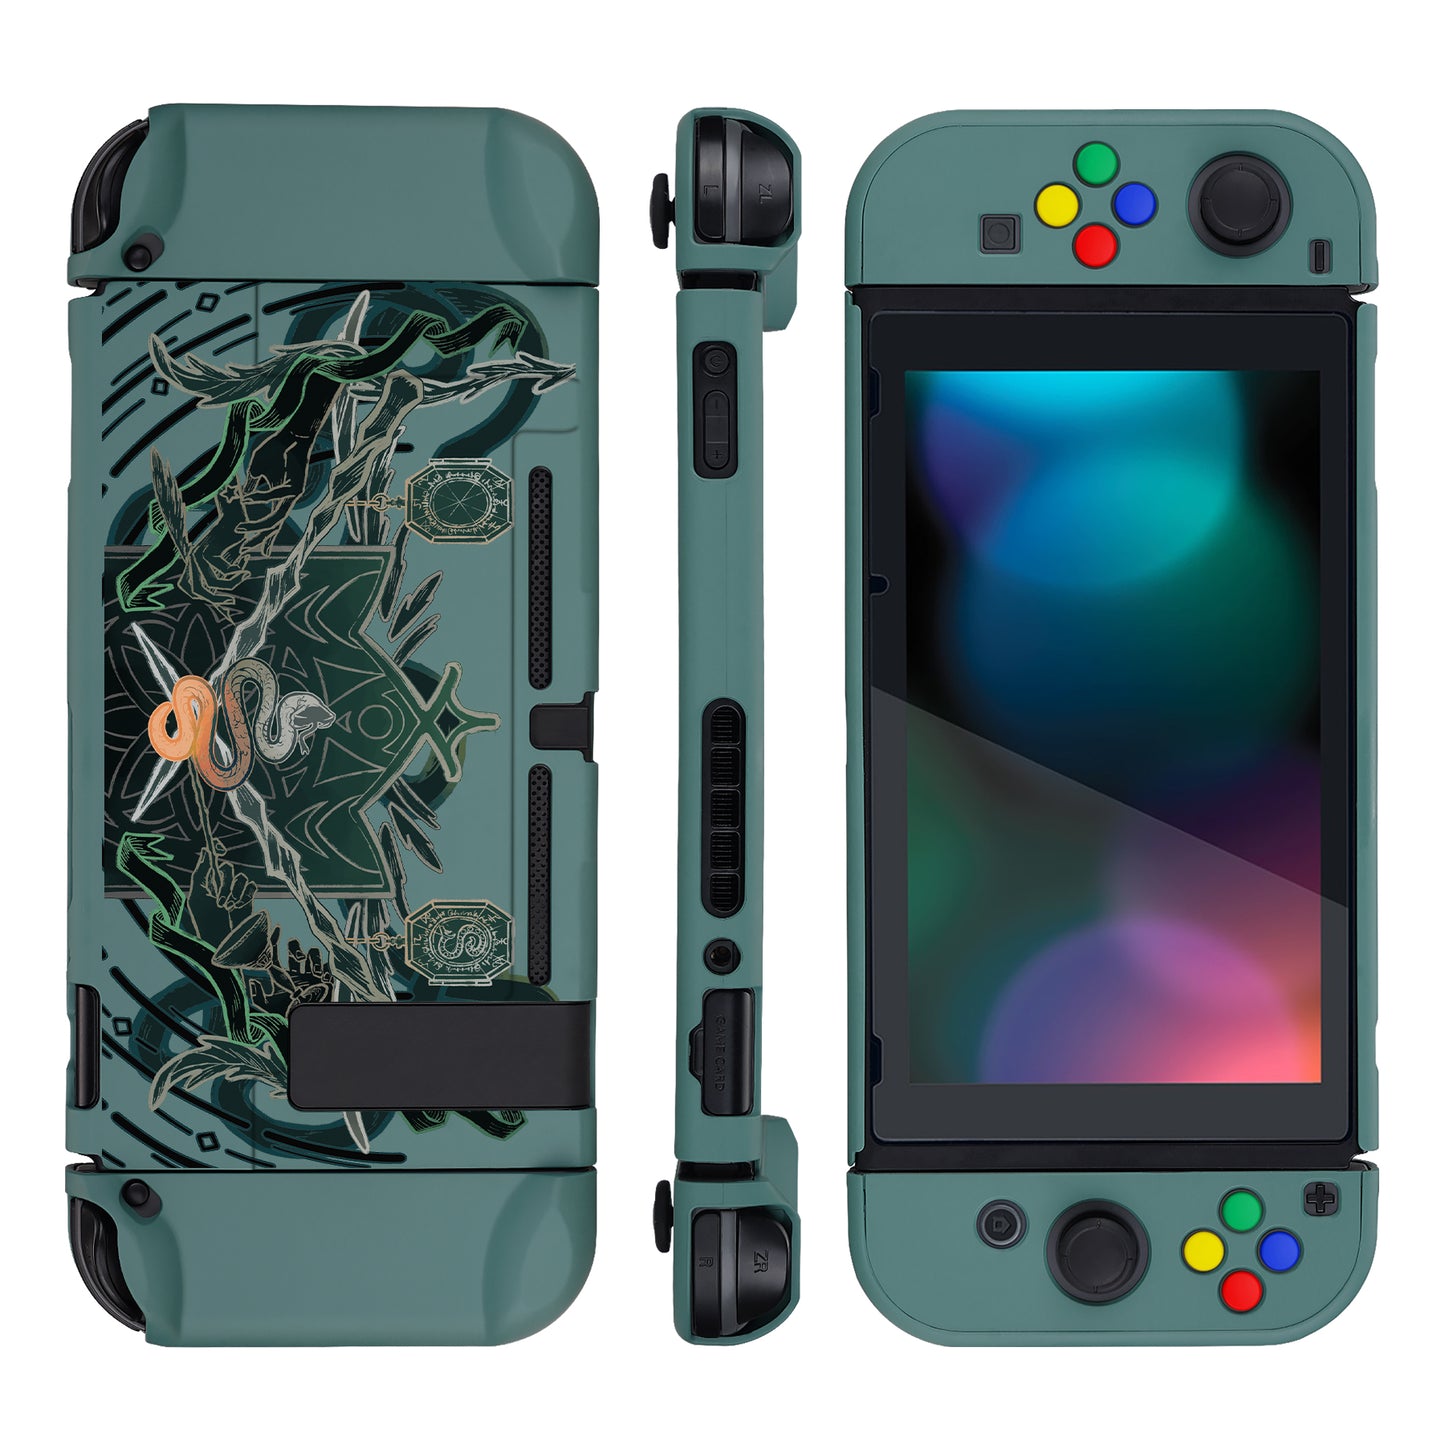 PlayVital Serpent Totem Back Cover for NS Switch Console, NS Joycon Handheld Controller Separable Protector Hard Shell, Dockable Protective Case with Red ABXY Direction Button Caps - NTT122 PlayVital